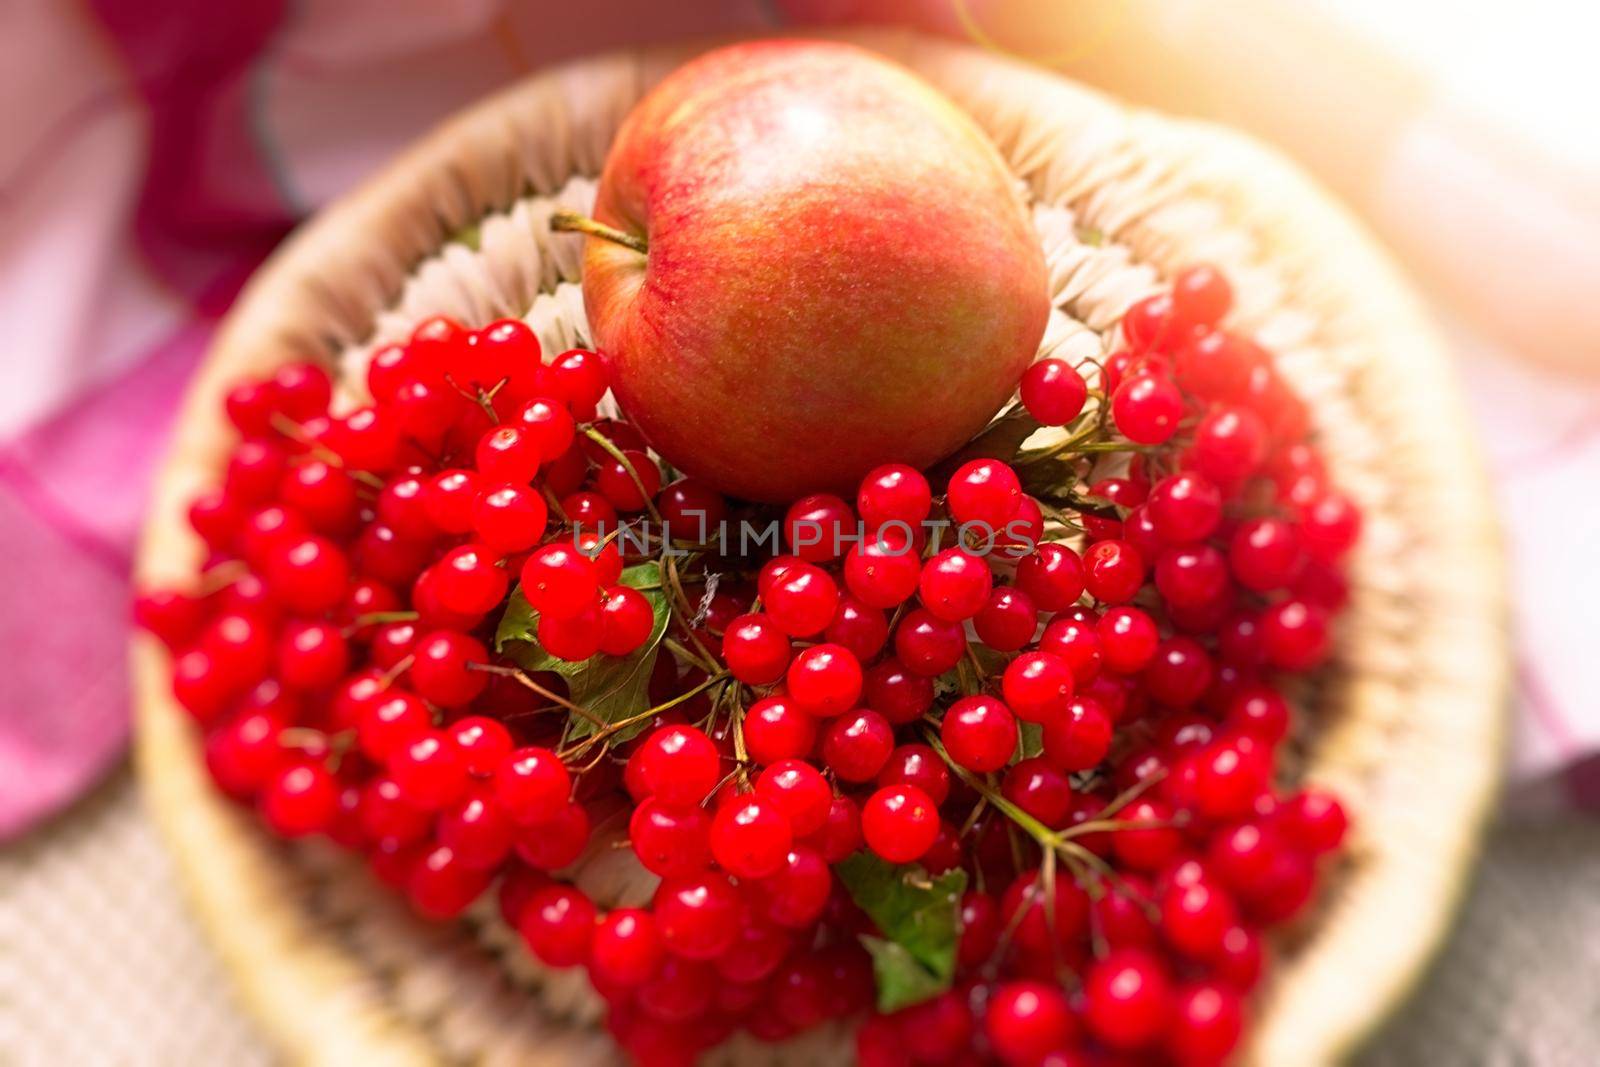 Red apple and a sprig of viburnum with berries on a wicker plate by clusterx